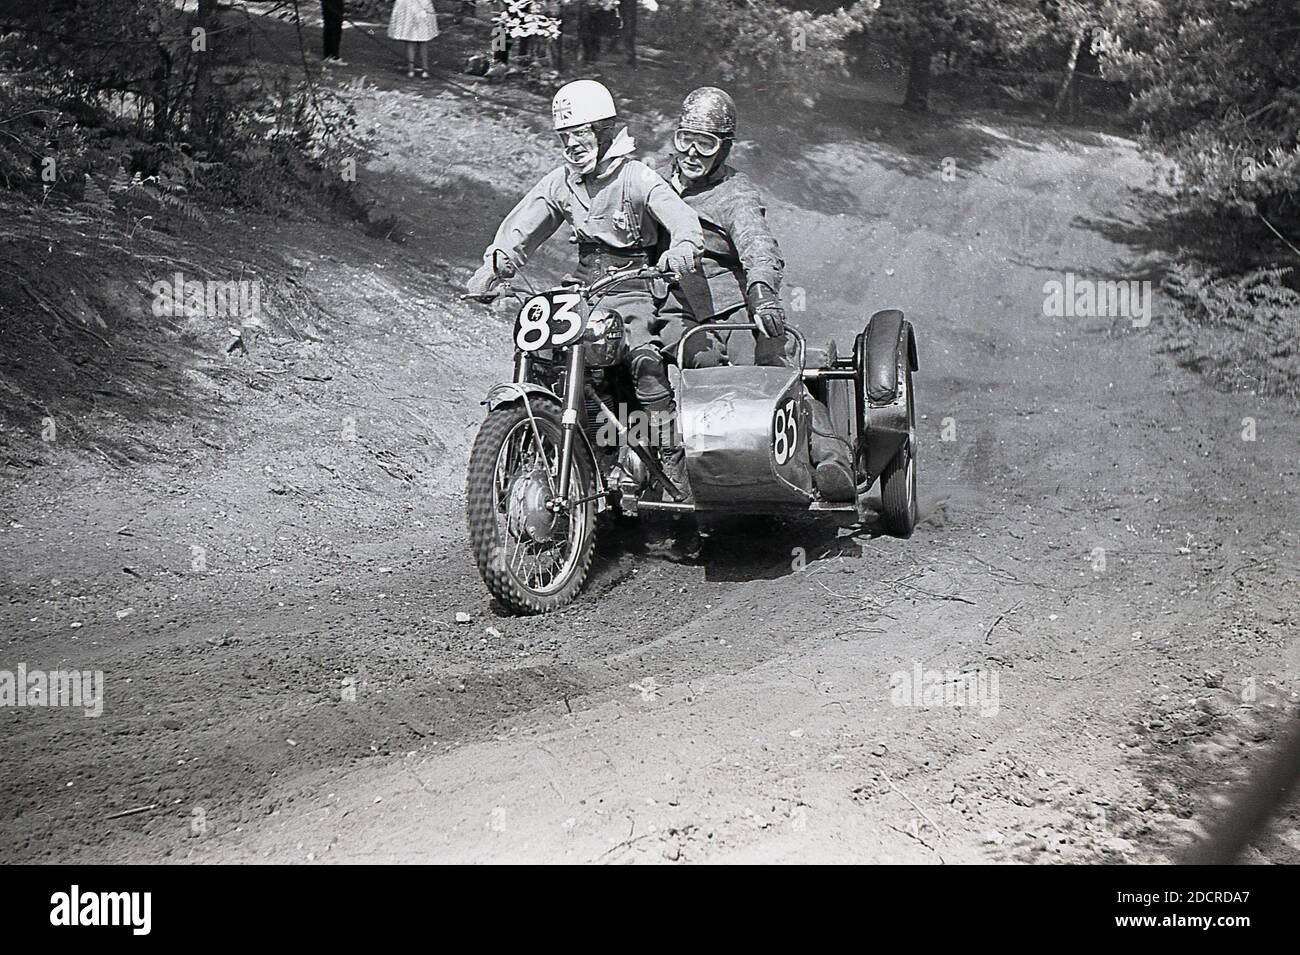 Late 1950s, a male competitor in a motorcycle scrambling event, riding across a muddy trail. Invented in 1924, in Camberley, Surrey, England, the bikes used to scramble in '50s and early '60s were little different from the road bikes of the time, with very little suspension. Today the sport is known as motocross – the French name for cross-country motorcycling – and referred to as Supercross in the USA. Stock Photo